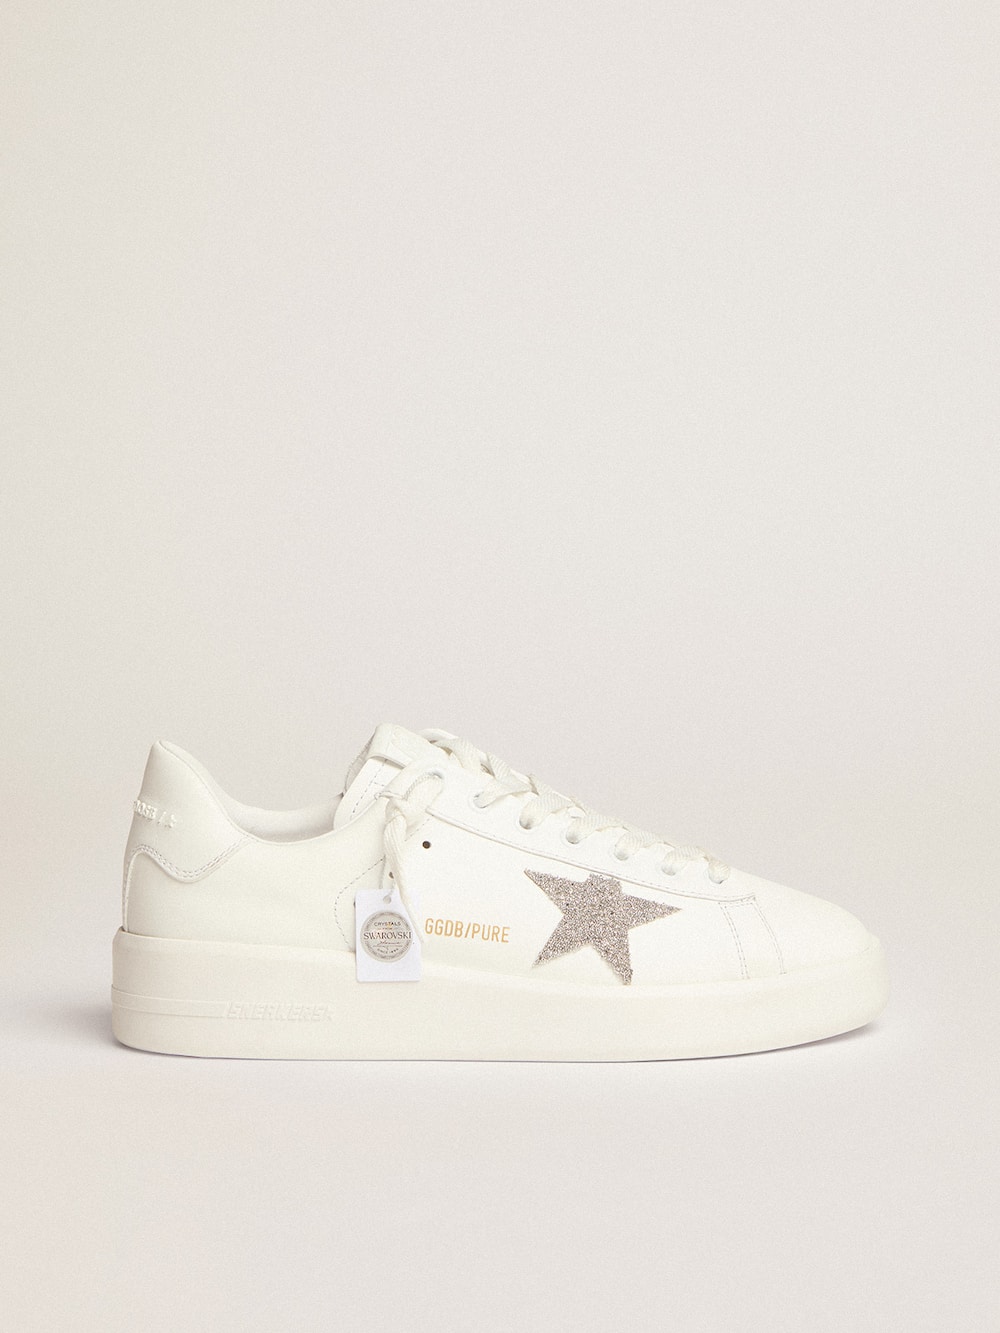 Golden Goose - Women’s Purestar in white leather with silver Swarovski crystal star in 